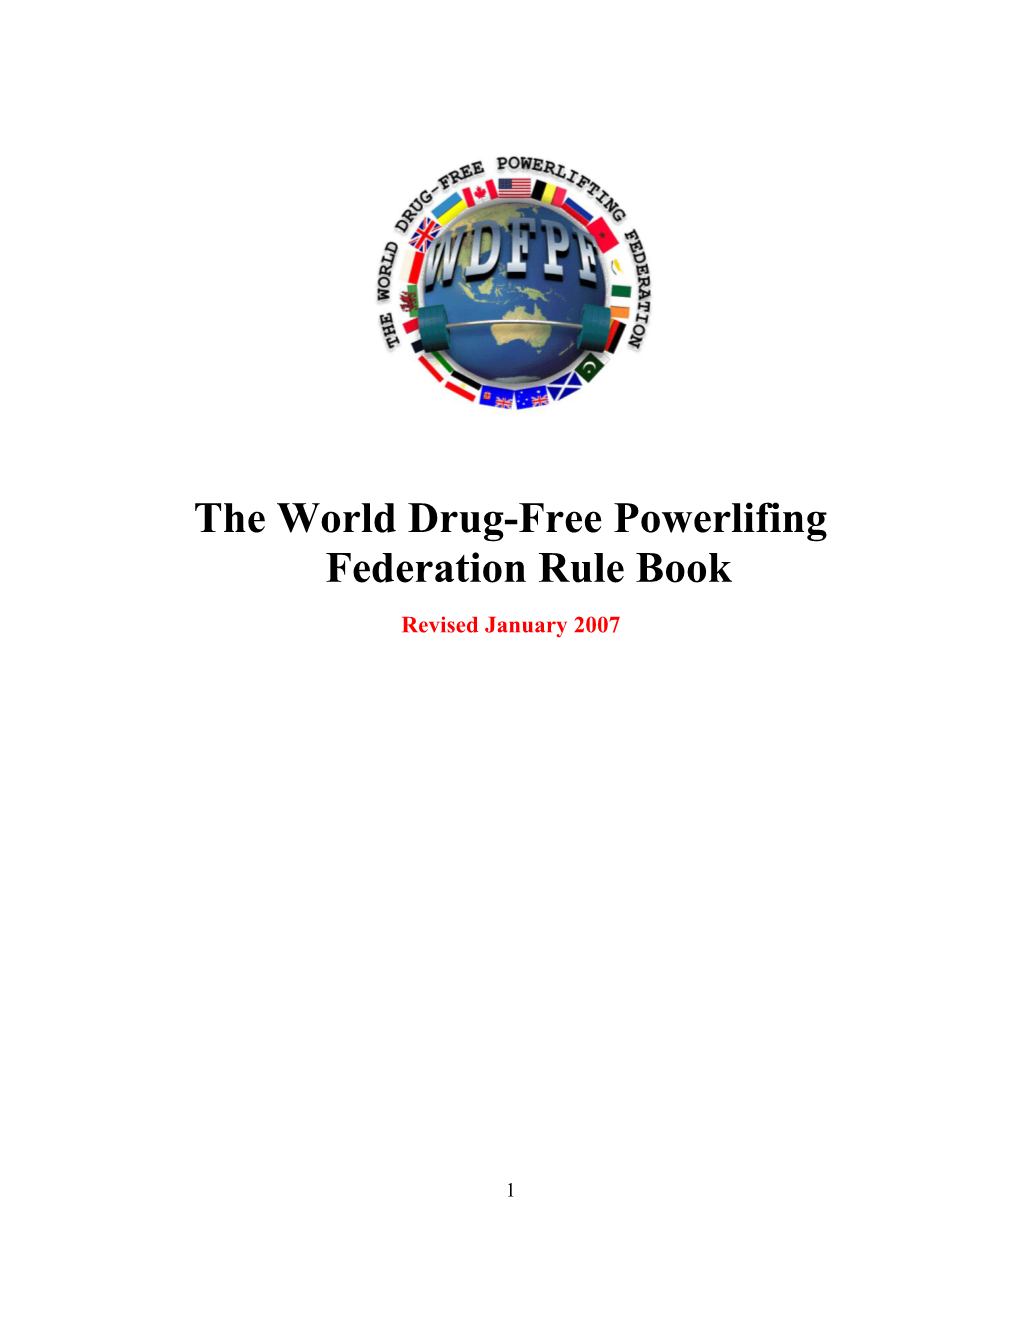 The World Drug-Free Powerlifing Federation Rule Book